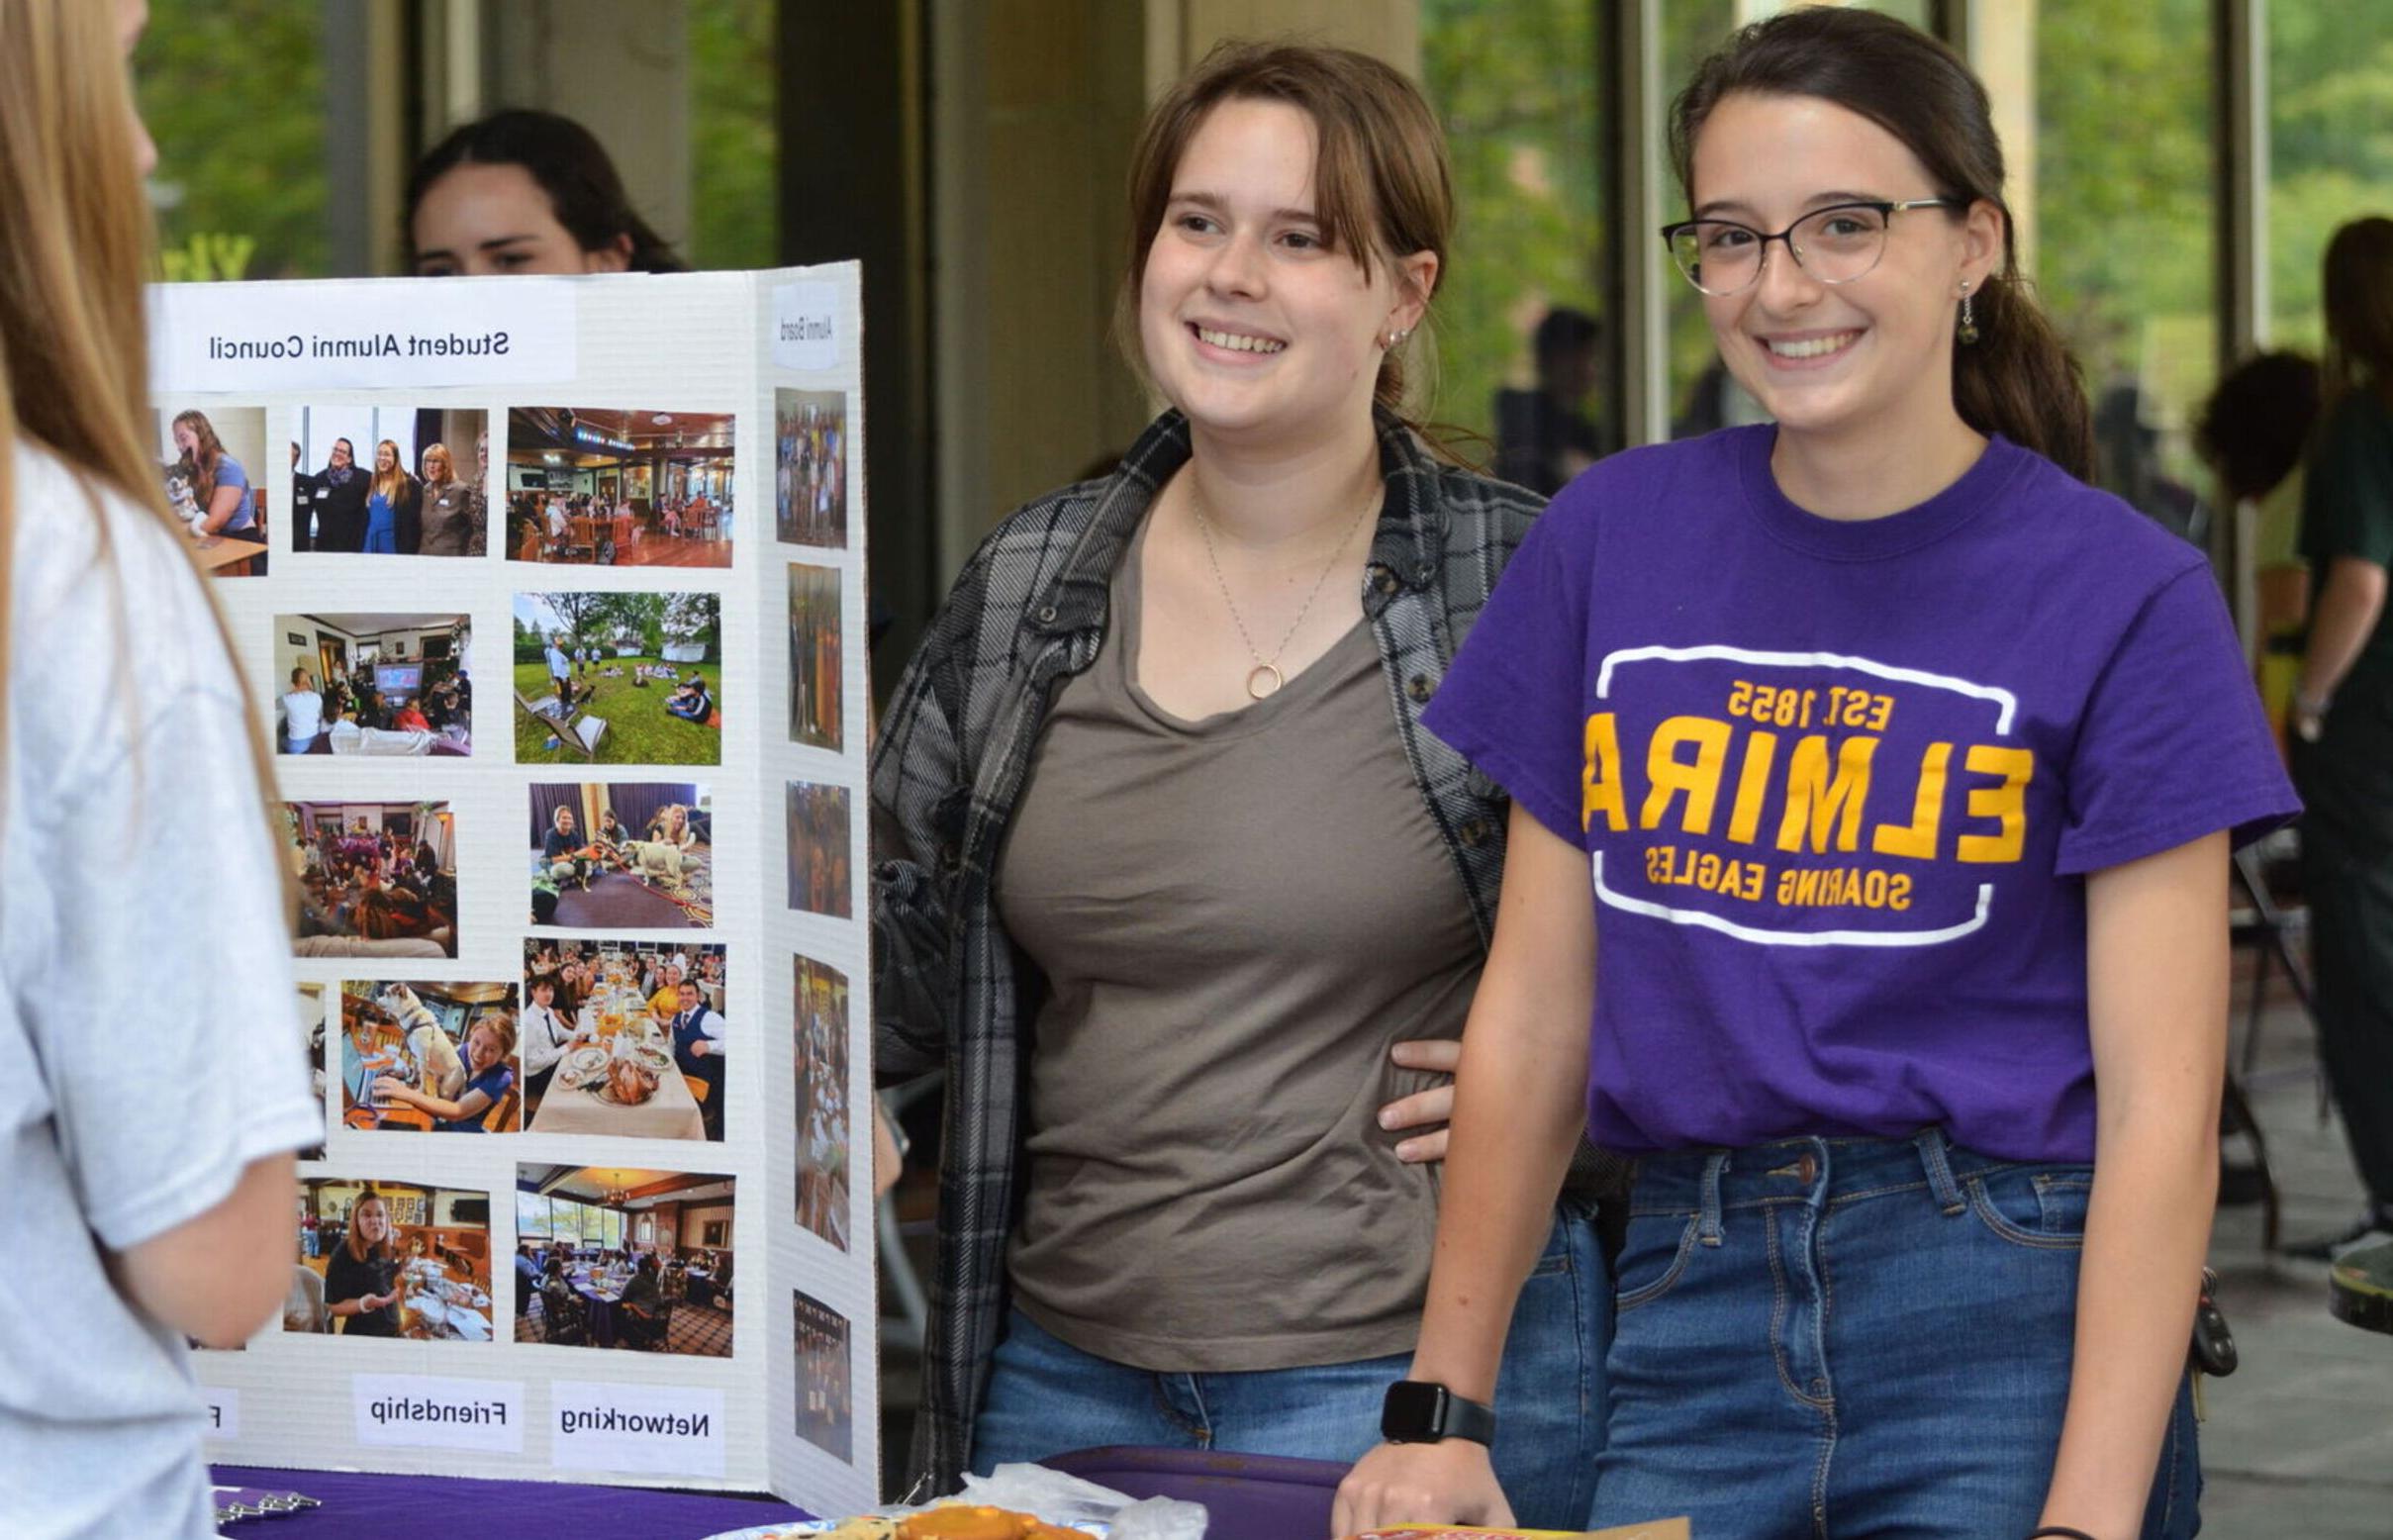 Two female students greet guests at the Student Alumni Council table